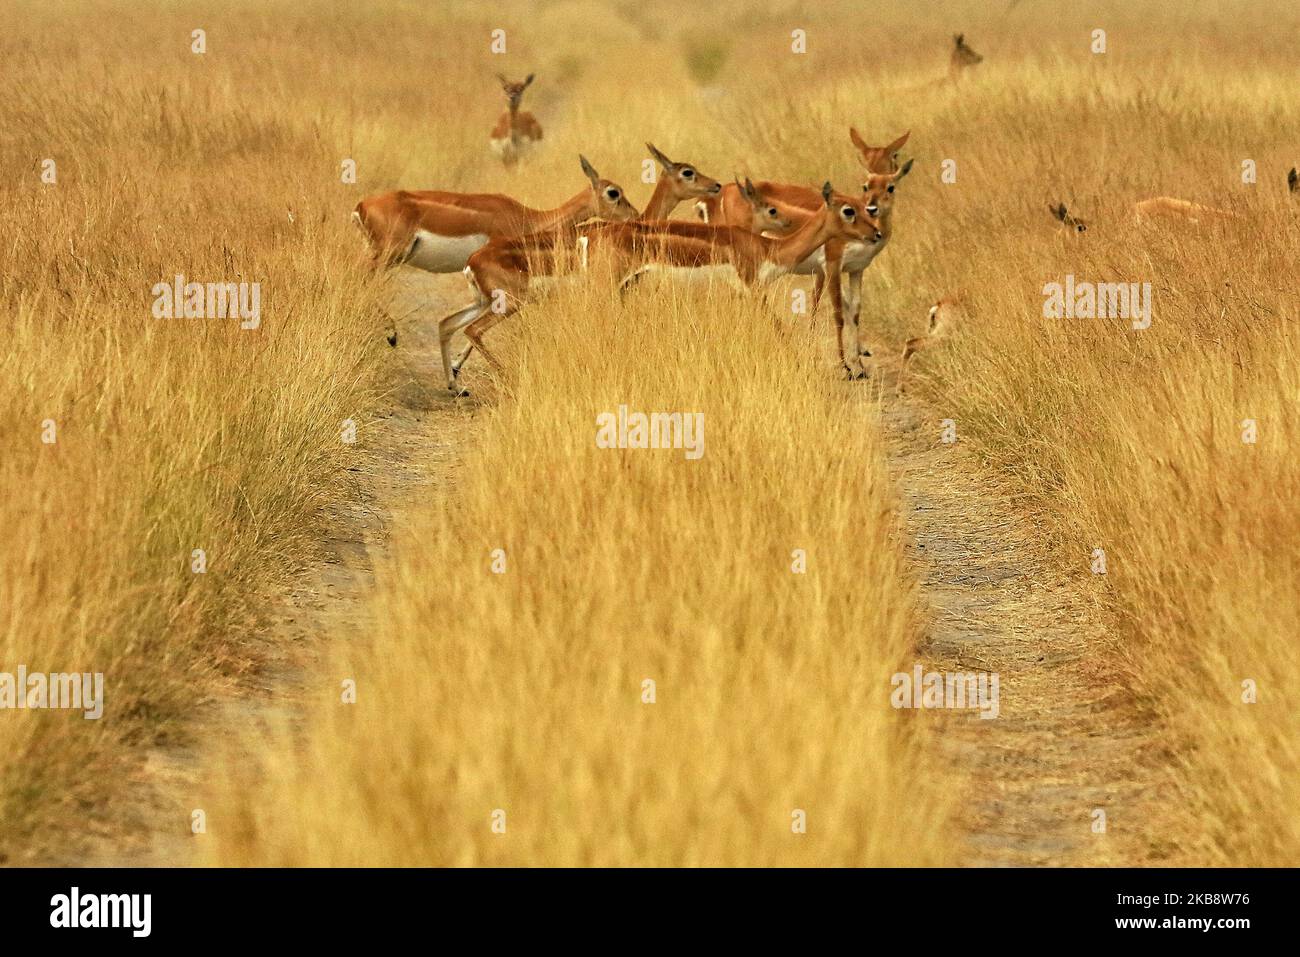 Black bucks herd at Tal Chhapar Sanctuary in Churu district of Rajasthan, India, Oct 21,2019.Tal Chhapar Sanctuary it is known for black bucks and is also home to a variety of birds. The sanctuary is 210 km from Jaipur on the fringe of the Great Indian Desert and situated on road from Ratangarh to Sujangarh. The Tal Chhapar sanctuary lies in the Sujangarh Tehsil of Churu District.(Photo By Vishal Bhatnagar/NurPhoto) (Photo by Vishal Bhatnagar/NurPhoto) Stock Photo